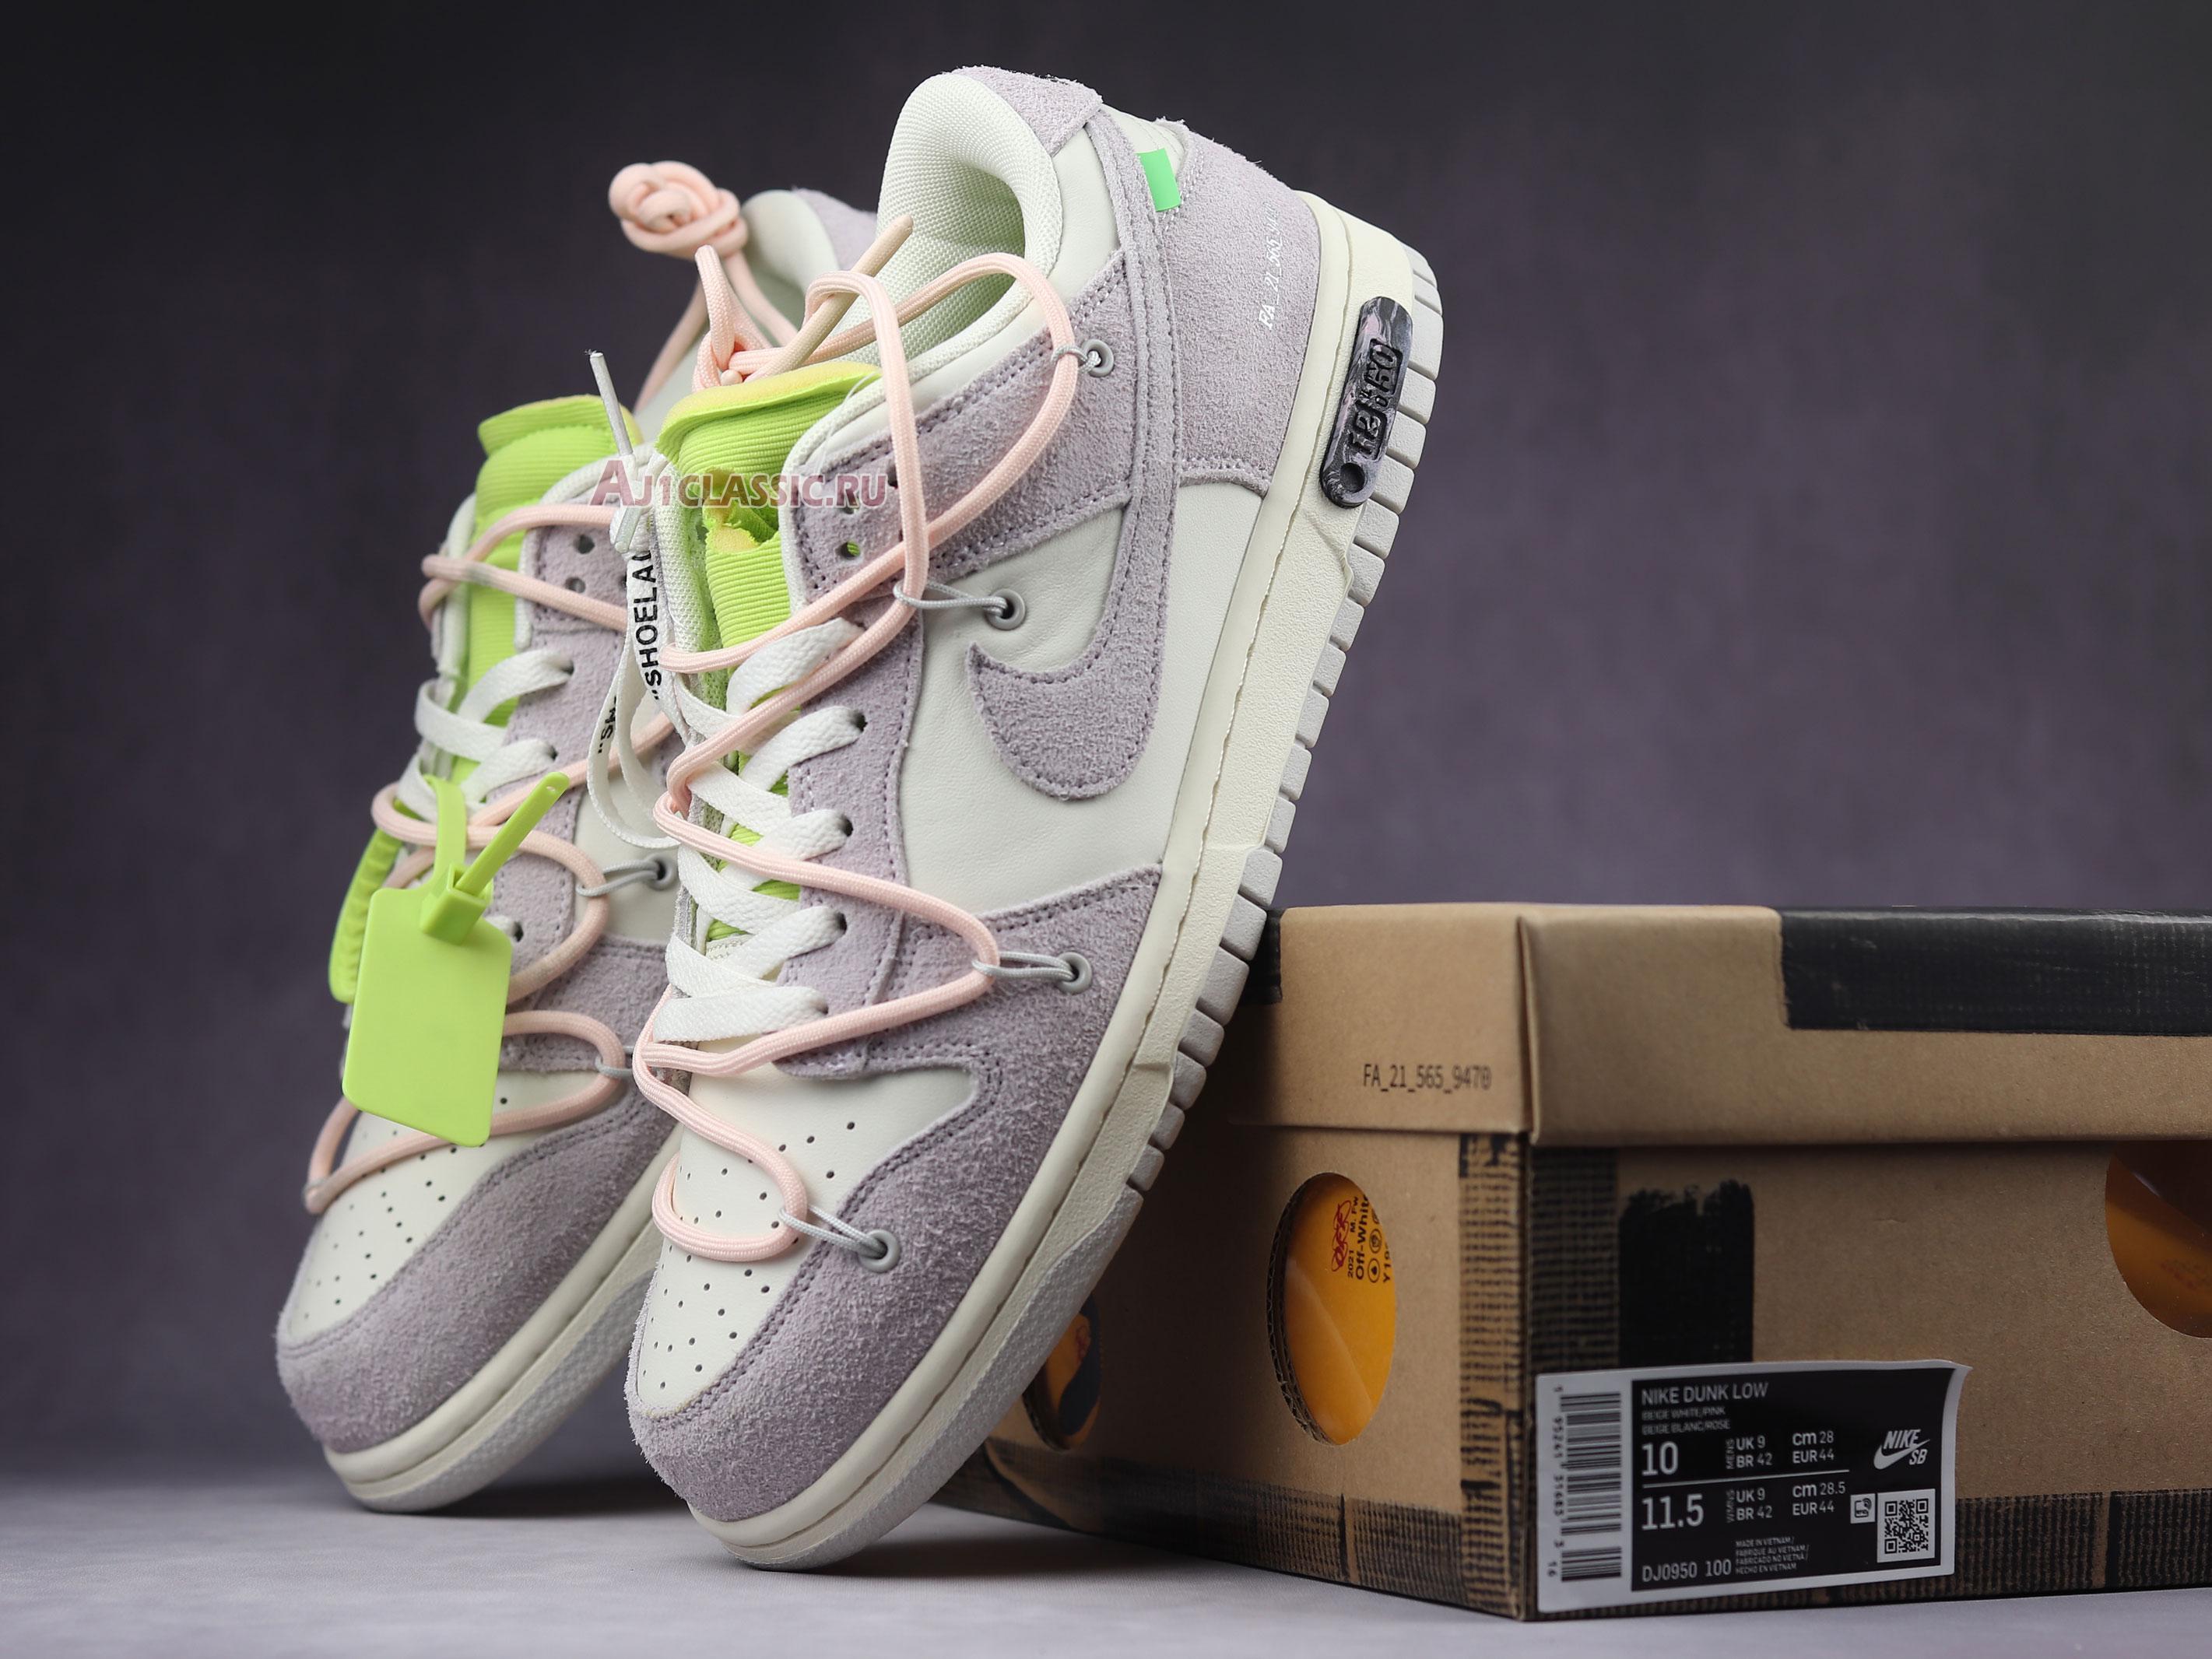 Off-White x Nike Dunk Low Lot 12 of 50 DJ0950-100 Sail/Neutral Grey/Crimson Tint-Pink Sneakers